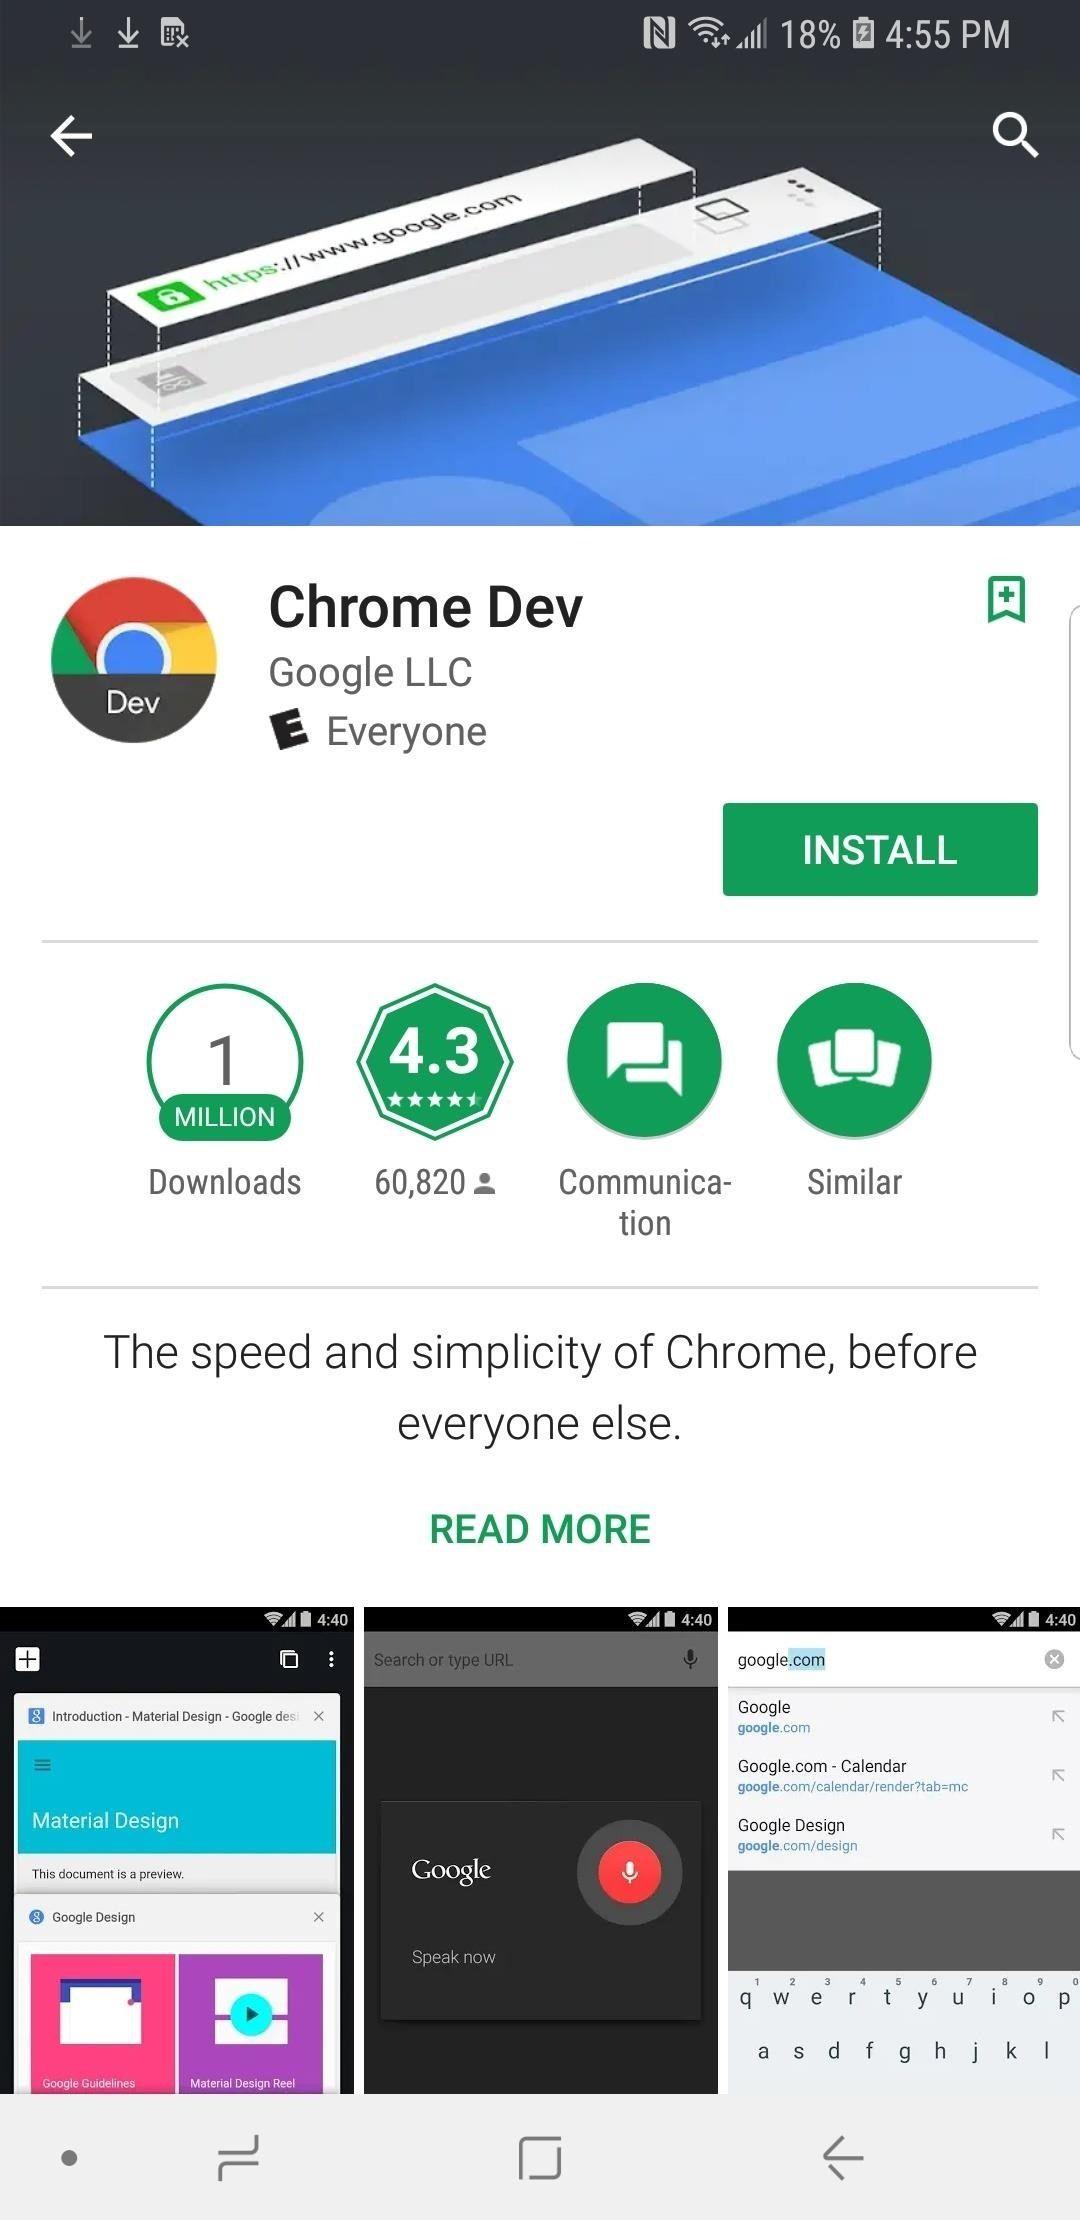 Browser N Logo - Google Chrome 101: How to Install the Beta Browser on iPhone ...